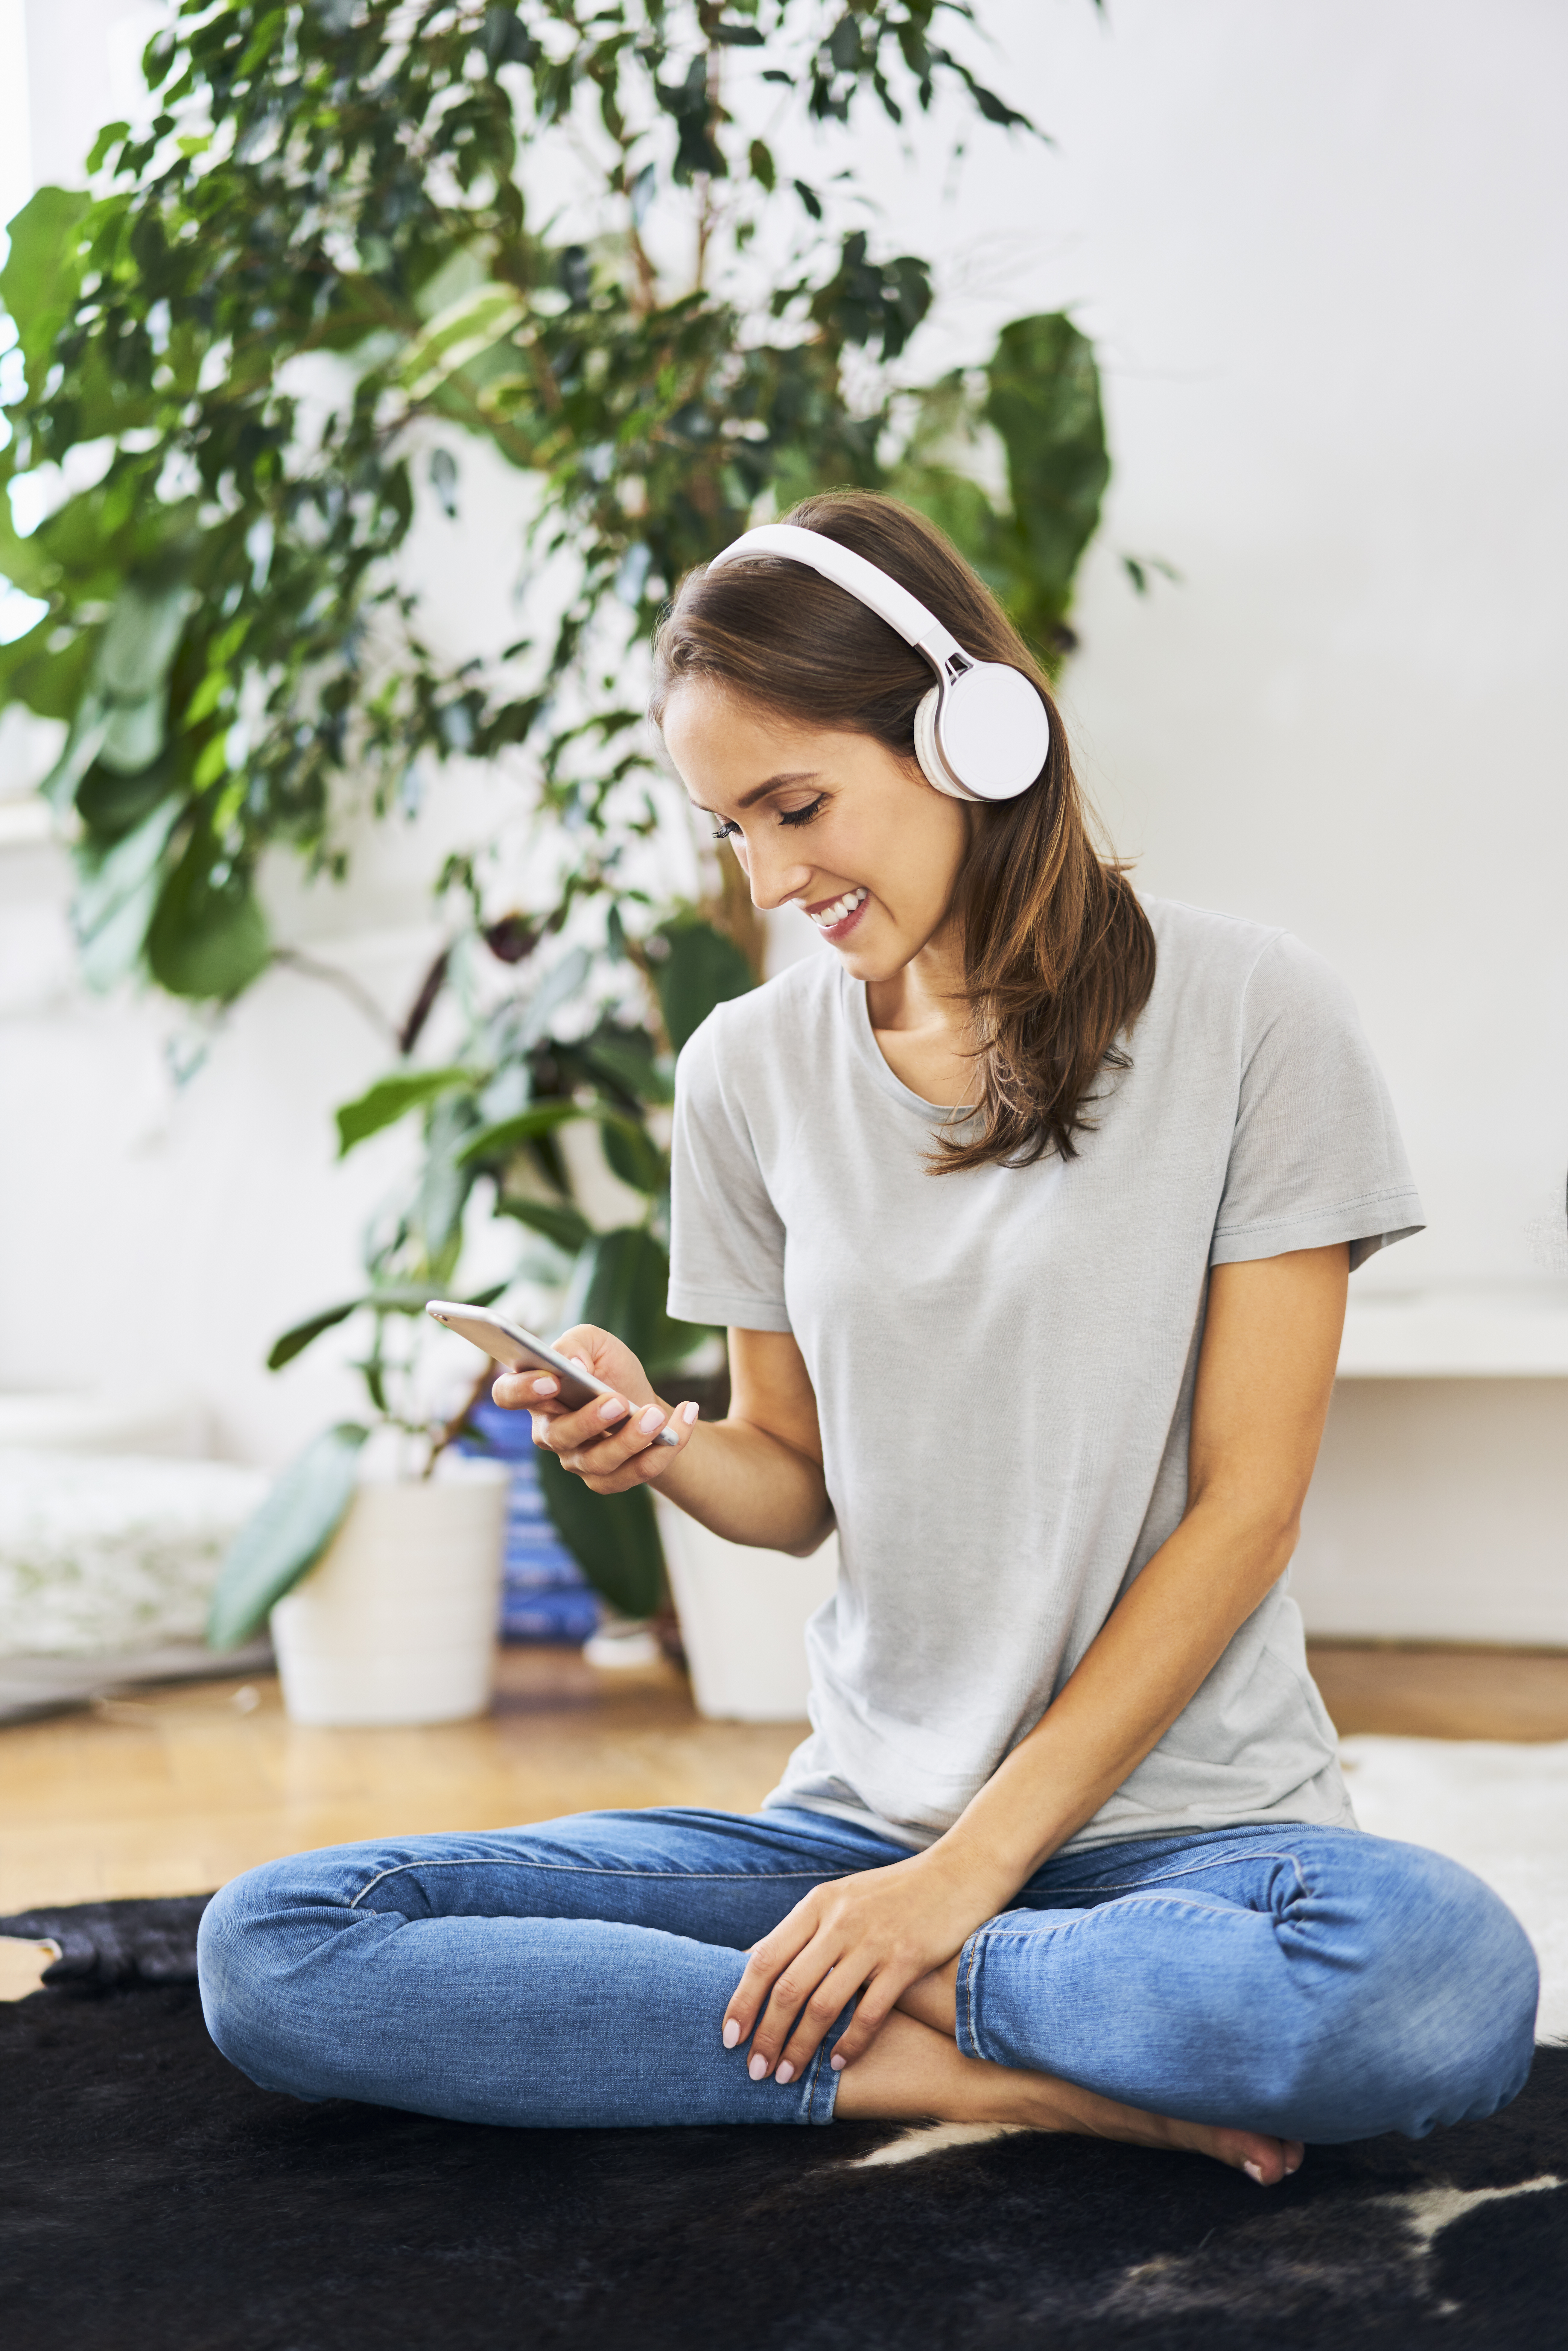 Smiling young woman sitting on the floor with headphones and cell phone